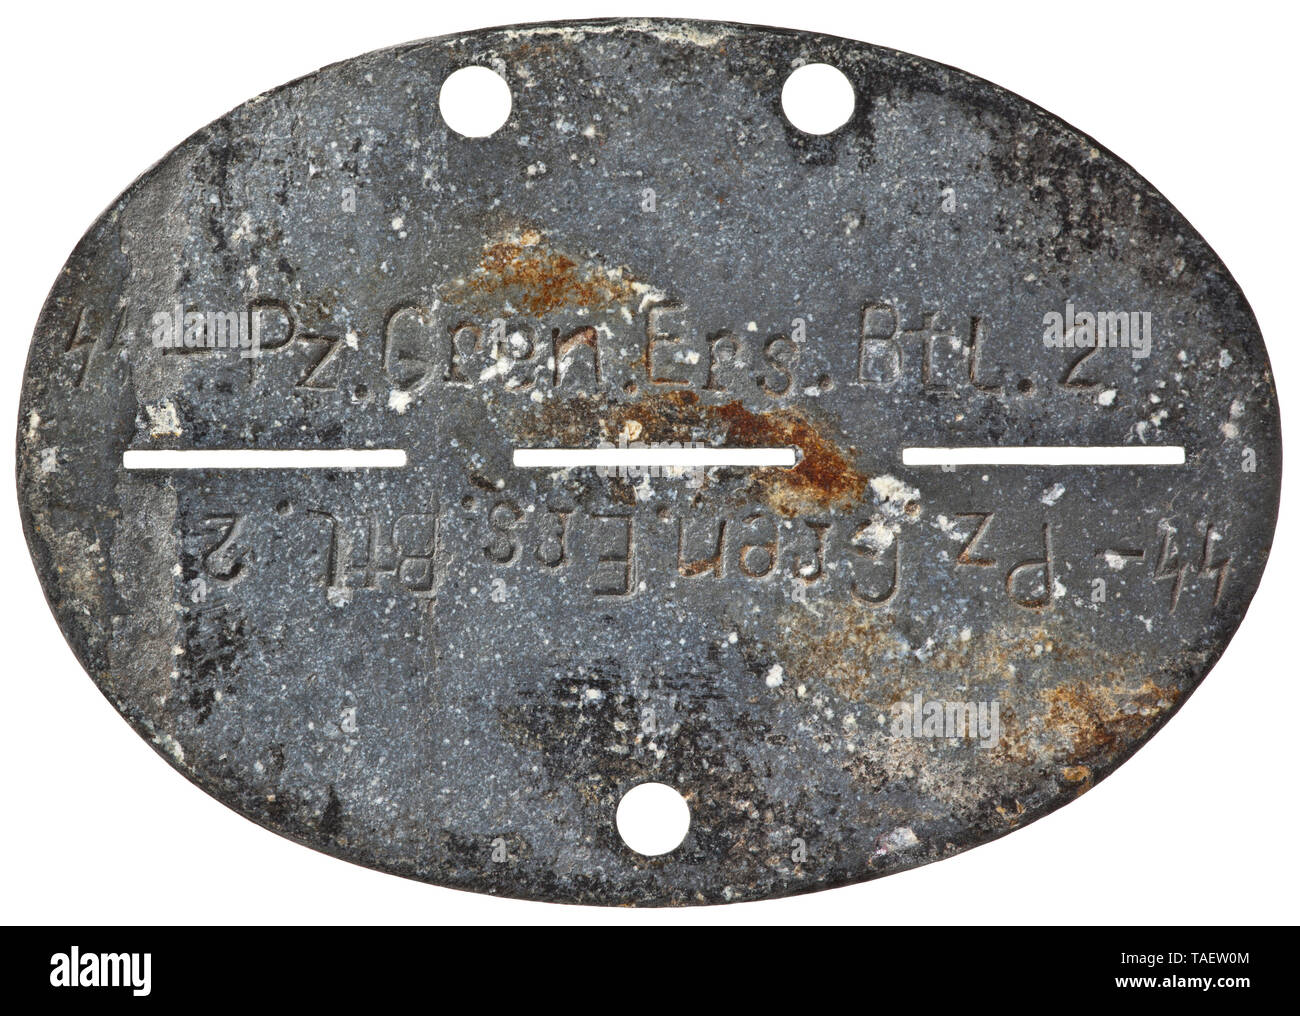 An identification tag, SS Panzer Grenadier Battalion 2 Feinzink (migriert) mit vs. Bezeichnung 'SS-Pz.Gren.Ers.Btl. 2', rs. ohne Markung. historic, historical, 20th century, 1930s, 1940s, Waffen-SS, armed division of the SS, armed service, armed services, NS, National Socialism, Nazism, Third Reich, German Reich, Germany, military, militaria, utensil, piece of equipment, utensils, object, objects, stills, clipping, clippings, cut out, cut-out, cut-outs, fascism, fascistic, National Socialist, Nazi, Nazi period, Editorial-Use-Only Stock Photo